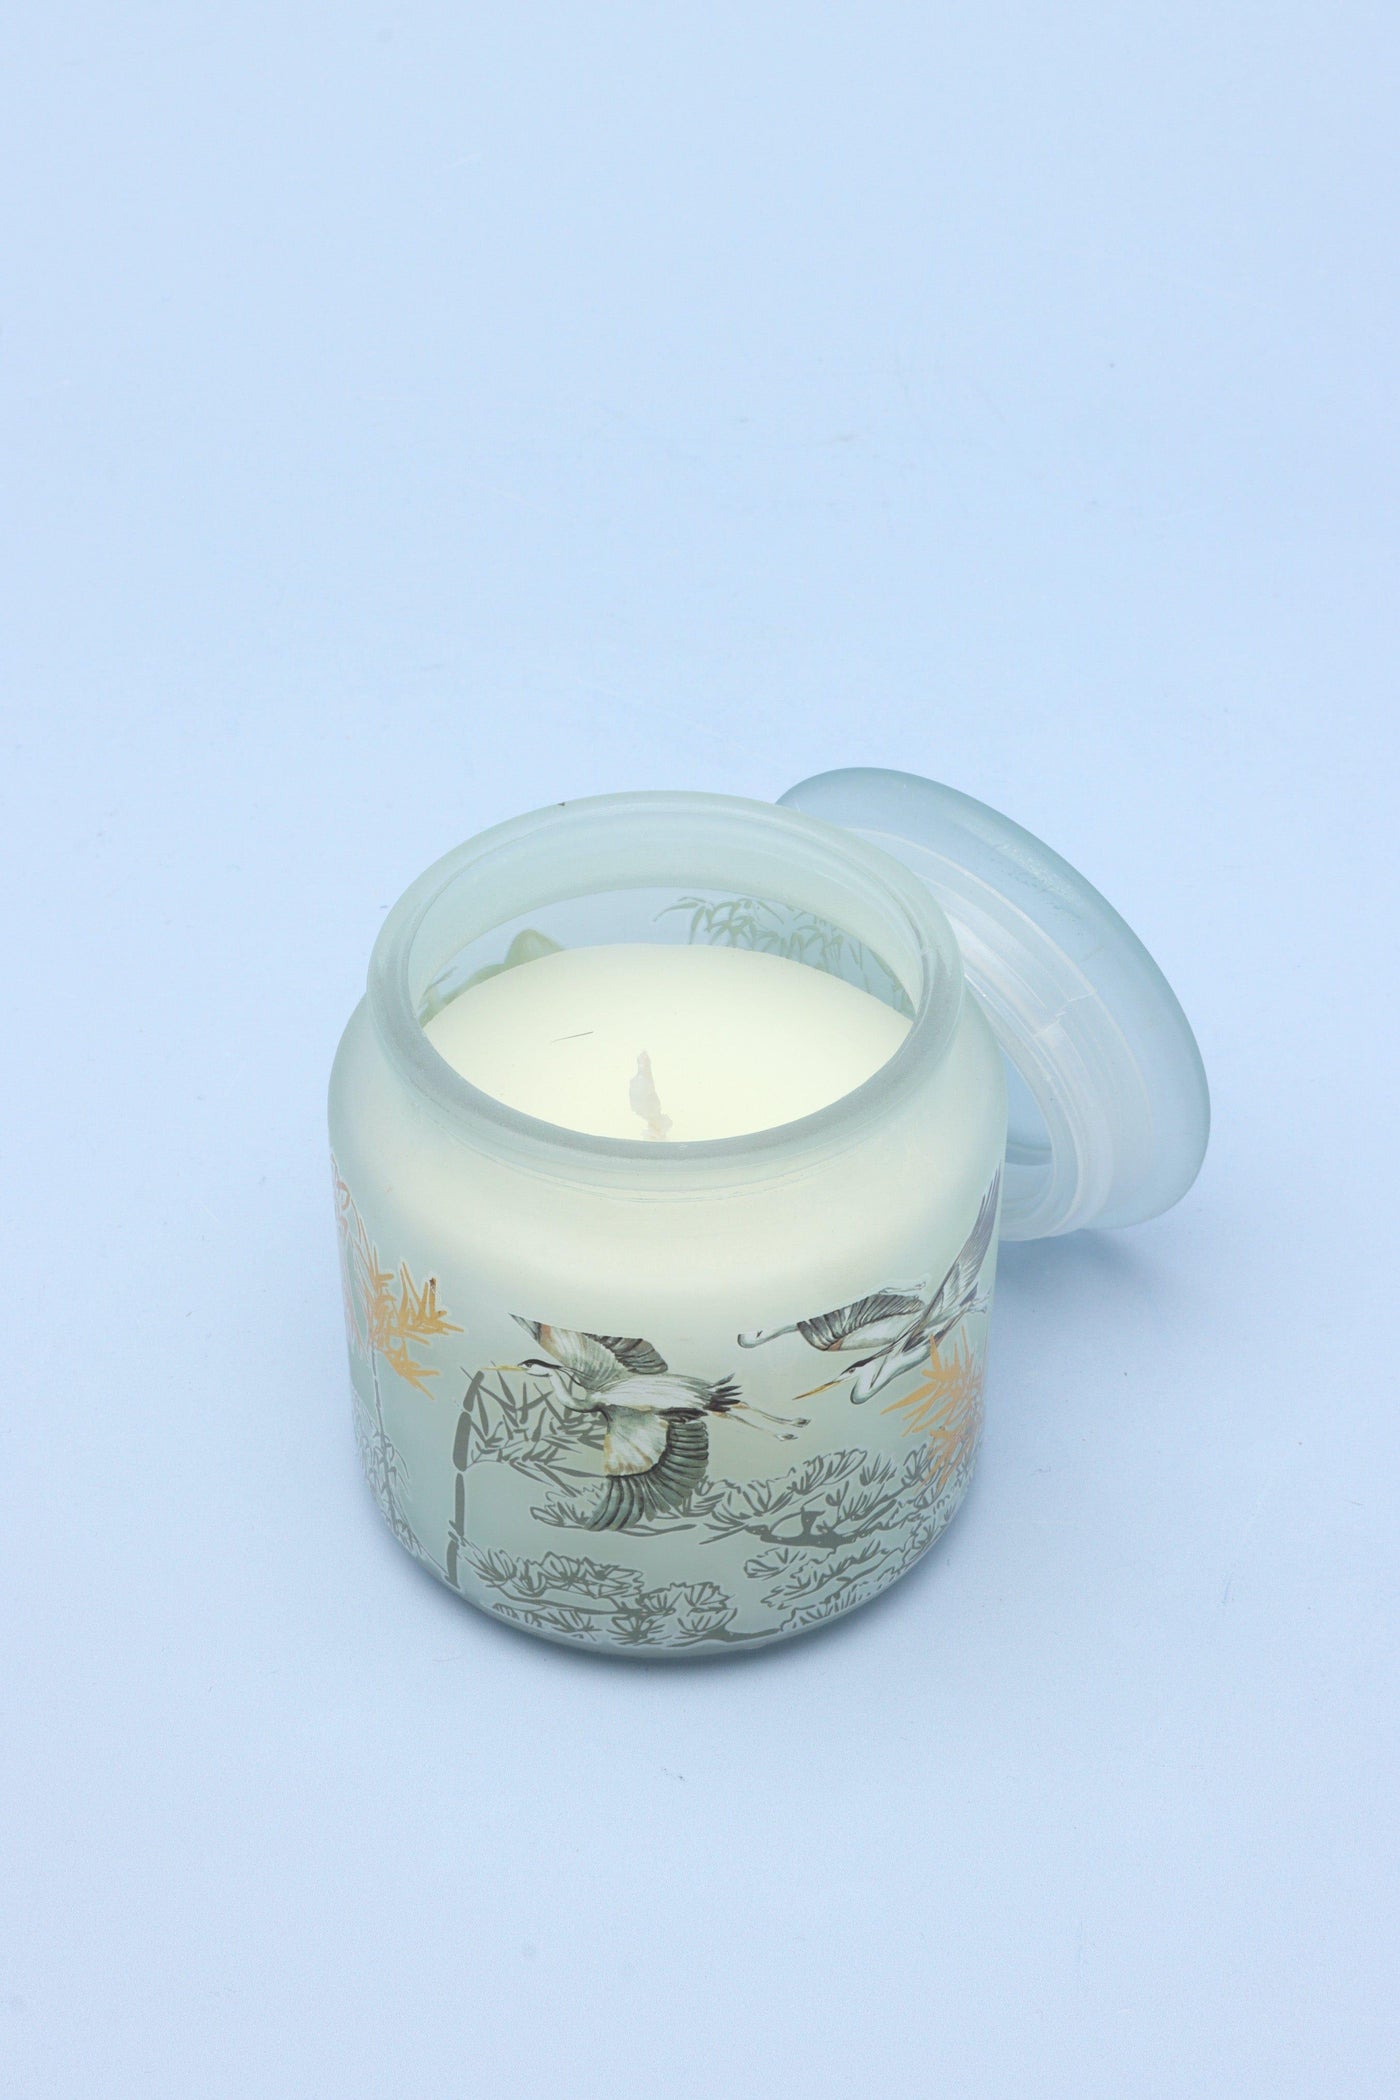 G Decor Candles Blue Crane Fresh Cotton Pastel Frosted Glass, Perfect for Meditation, Large Jar Candle